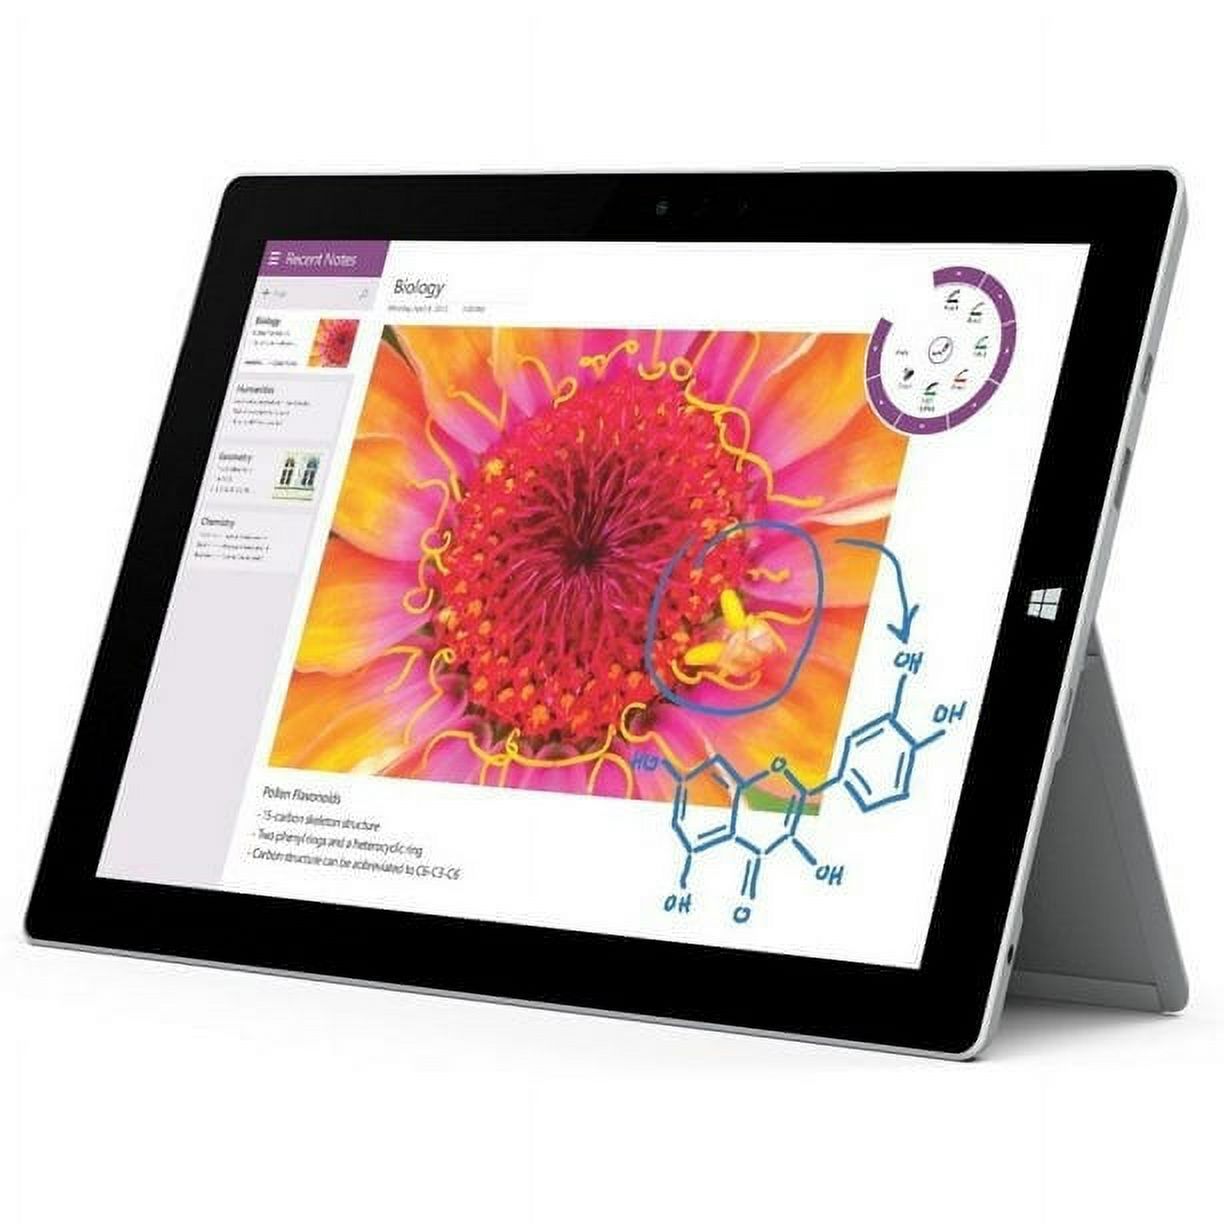 Pre-Owned Microsoft Surface 3 Tablet (10.8-Inch, 64 GB, Intel Atom, Windows 10) (Refurbished: Good) - image 1 of 7